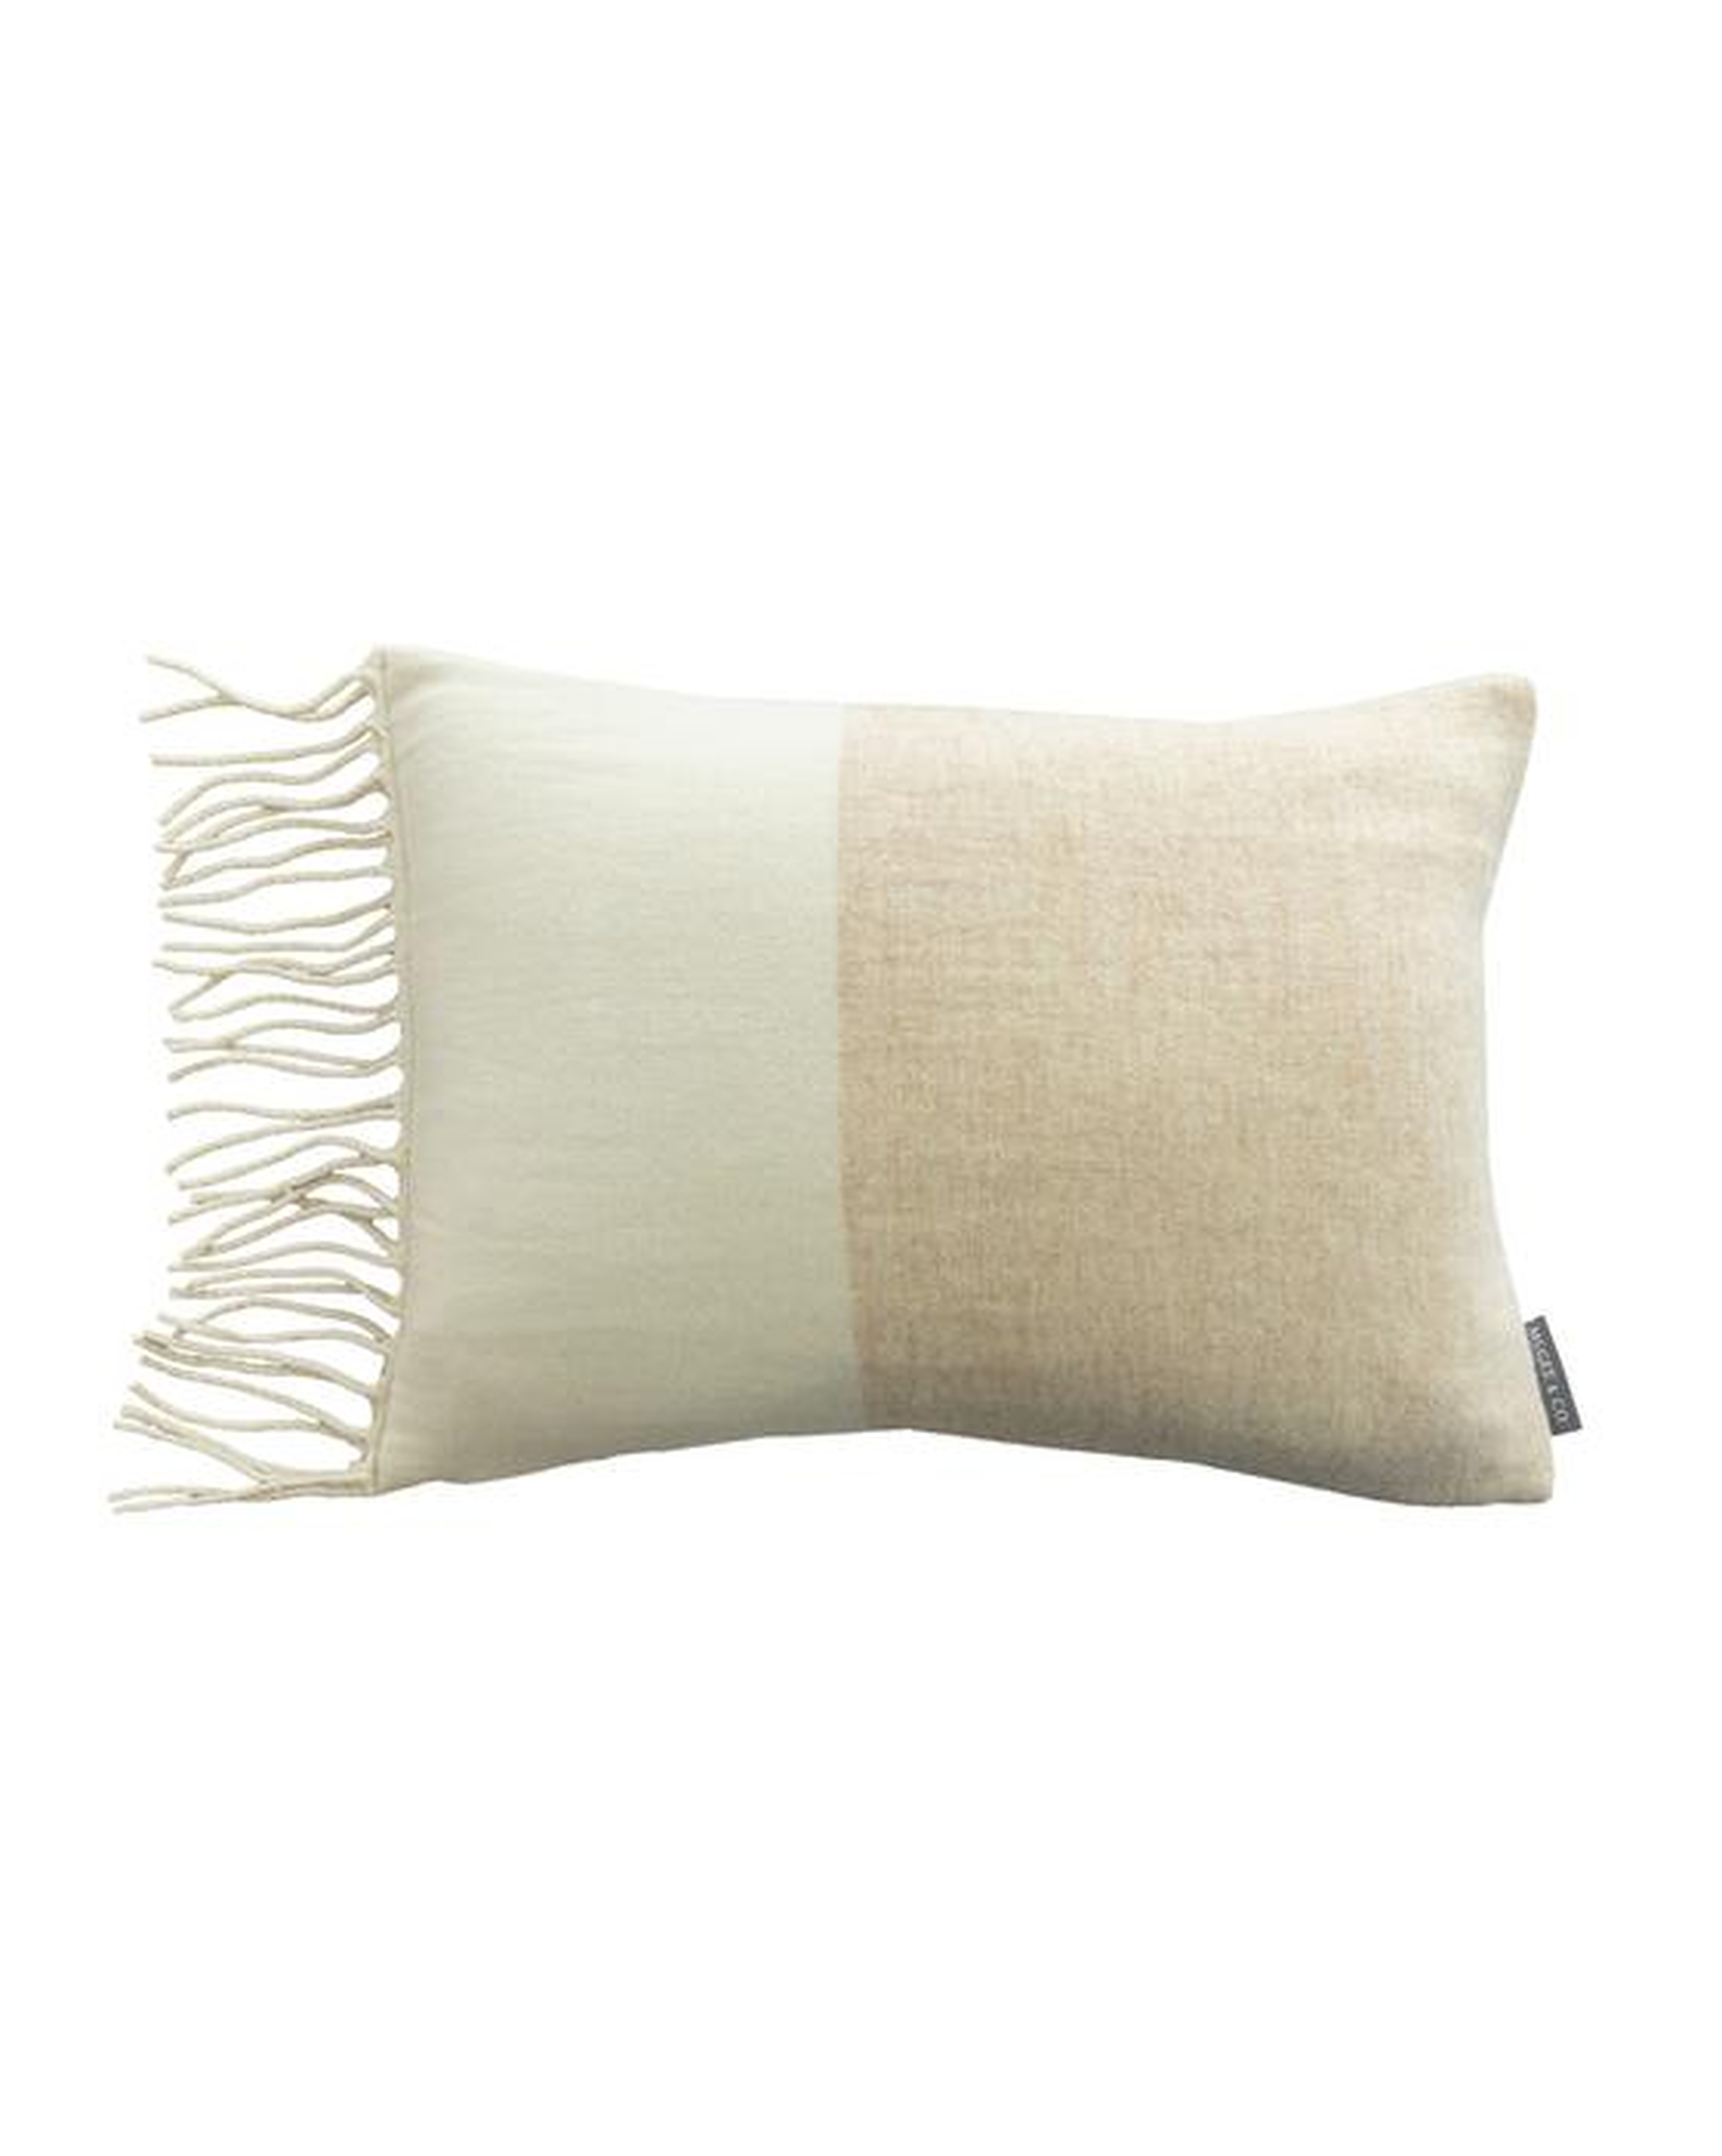 Jada Colorblock Wool Pillow Cover - McGee & Co.